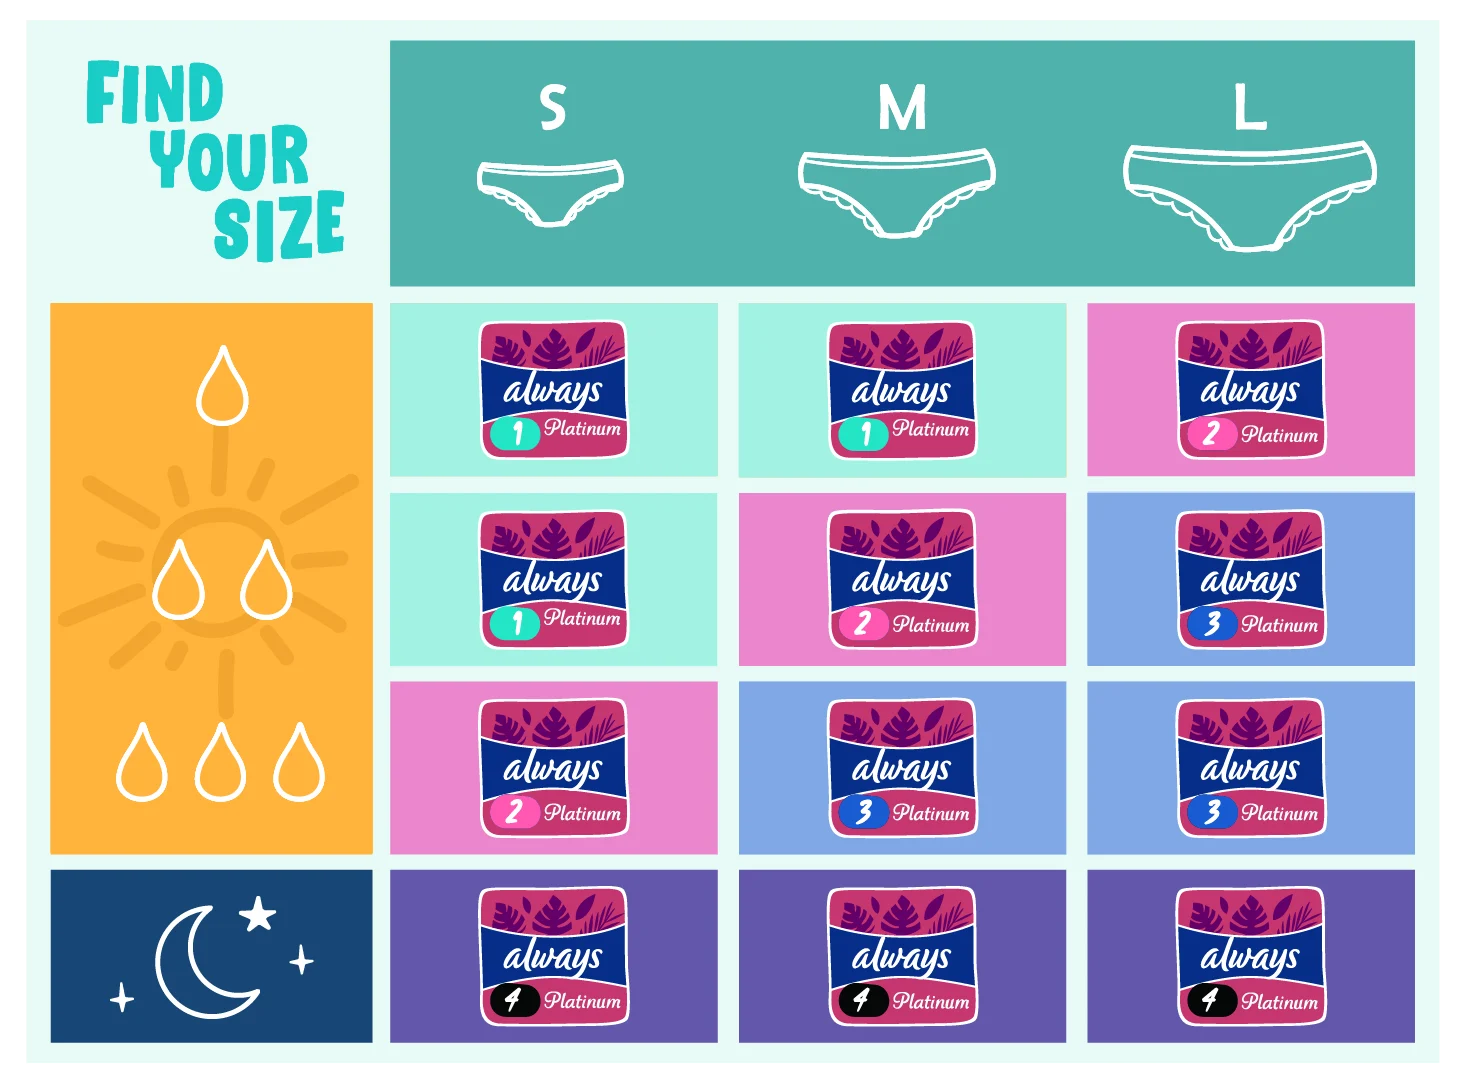 Always MY FIT product size chart